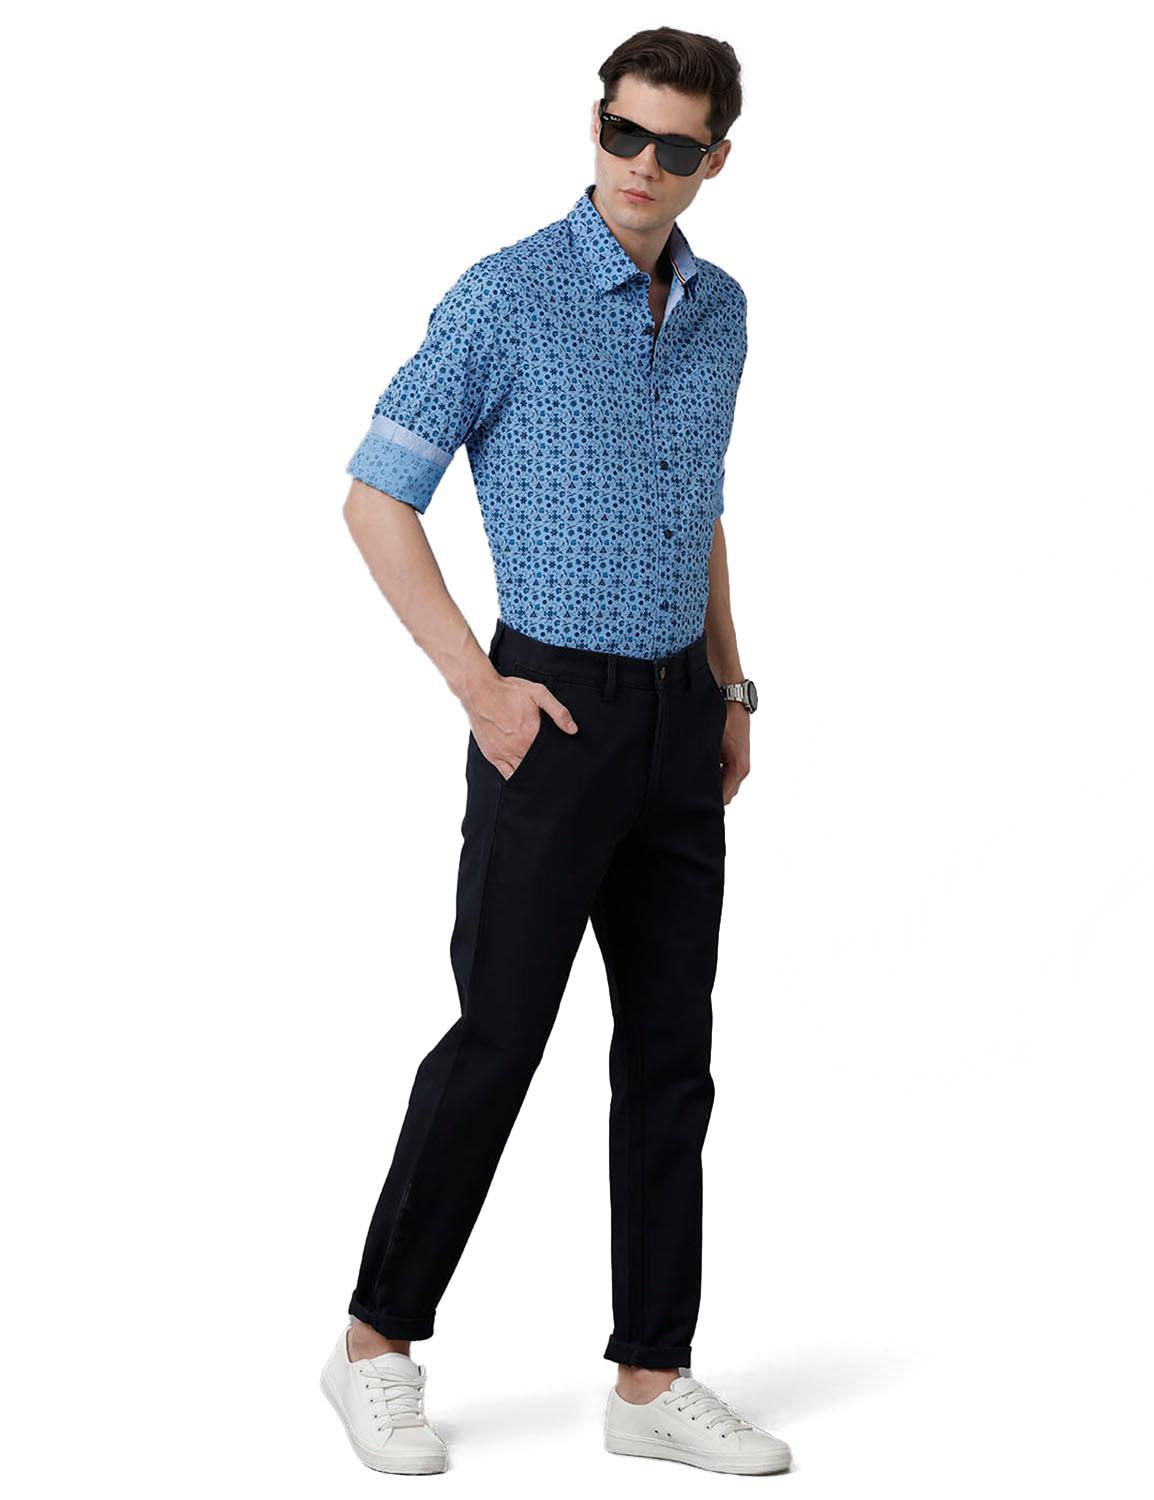 Navy Blue Solid Slim Fit Trouser - Double Two